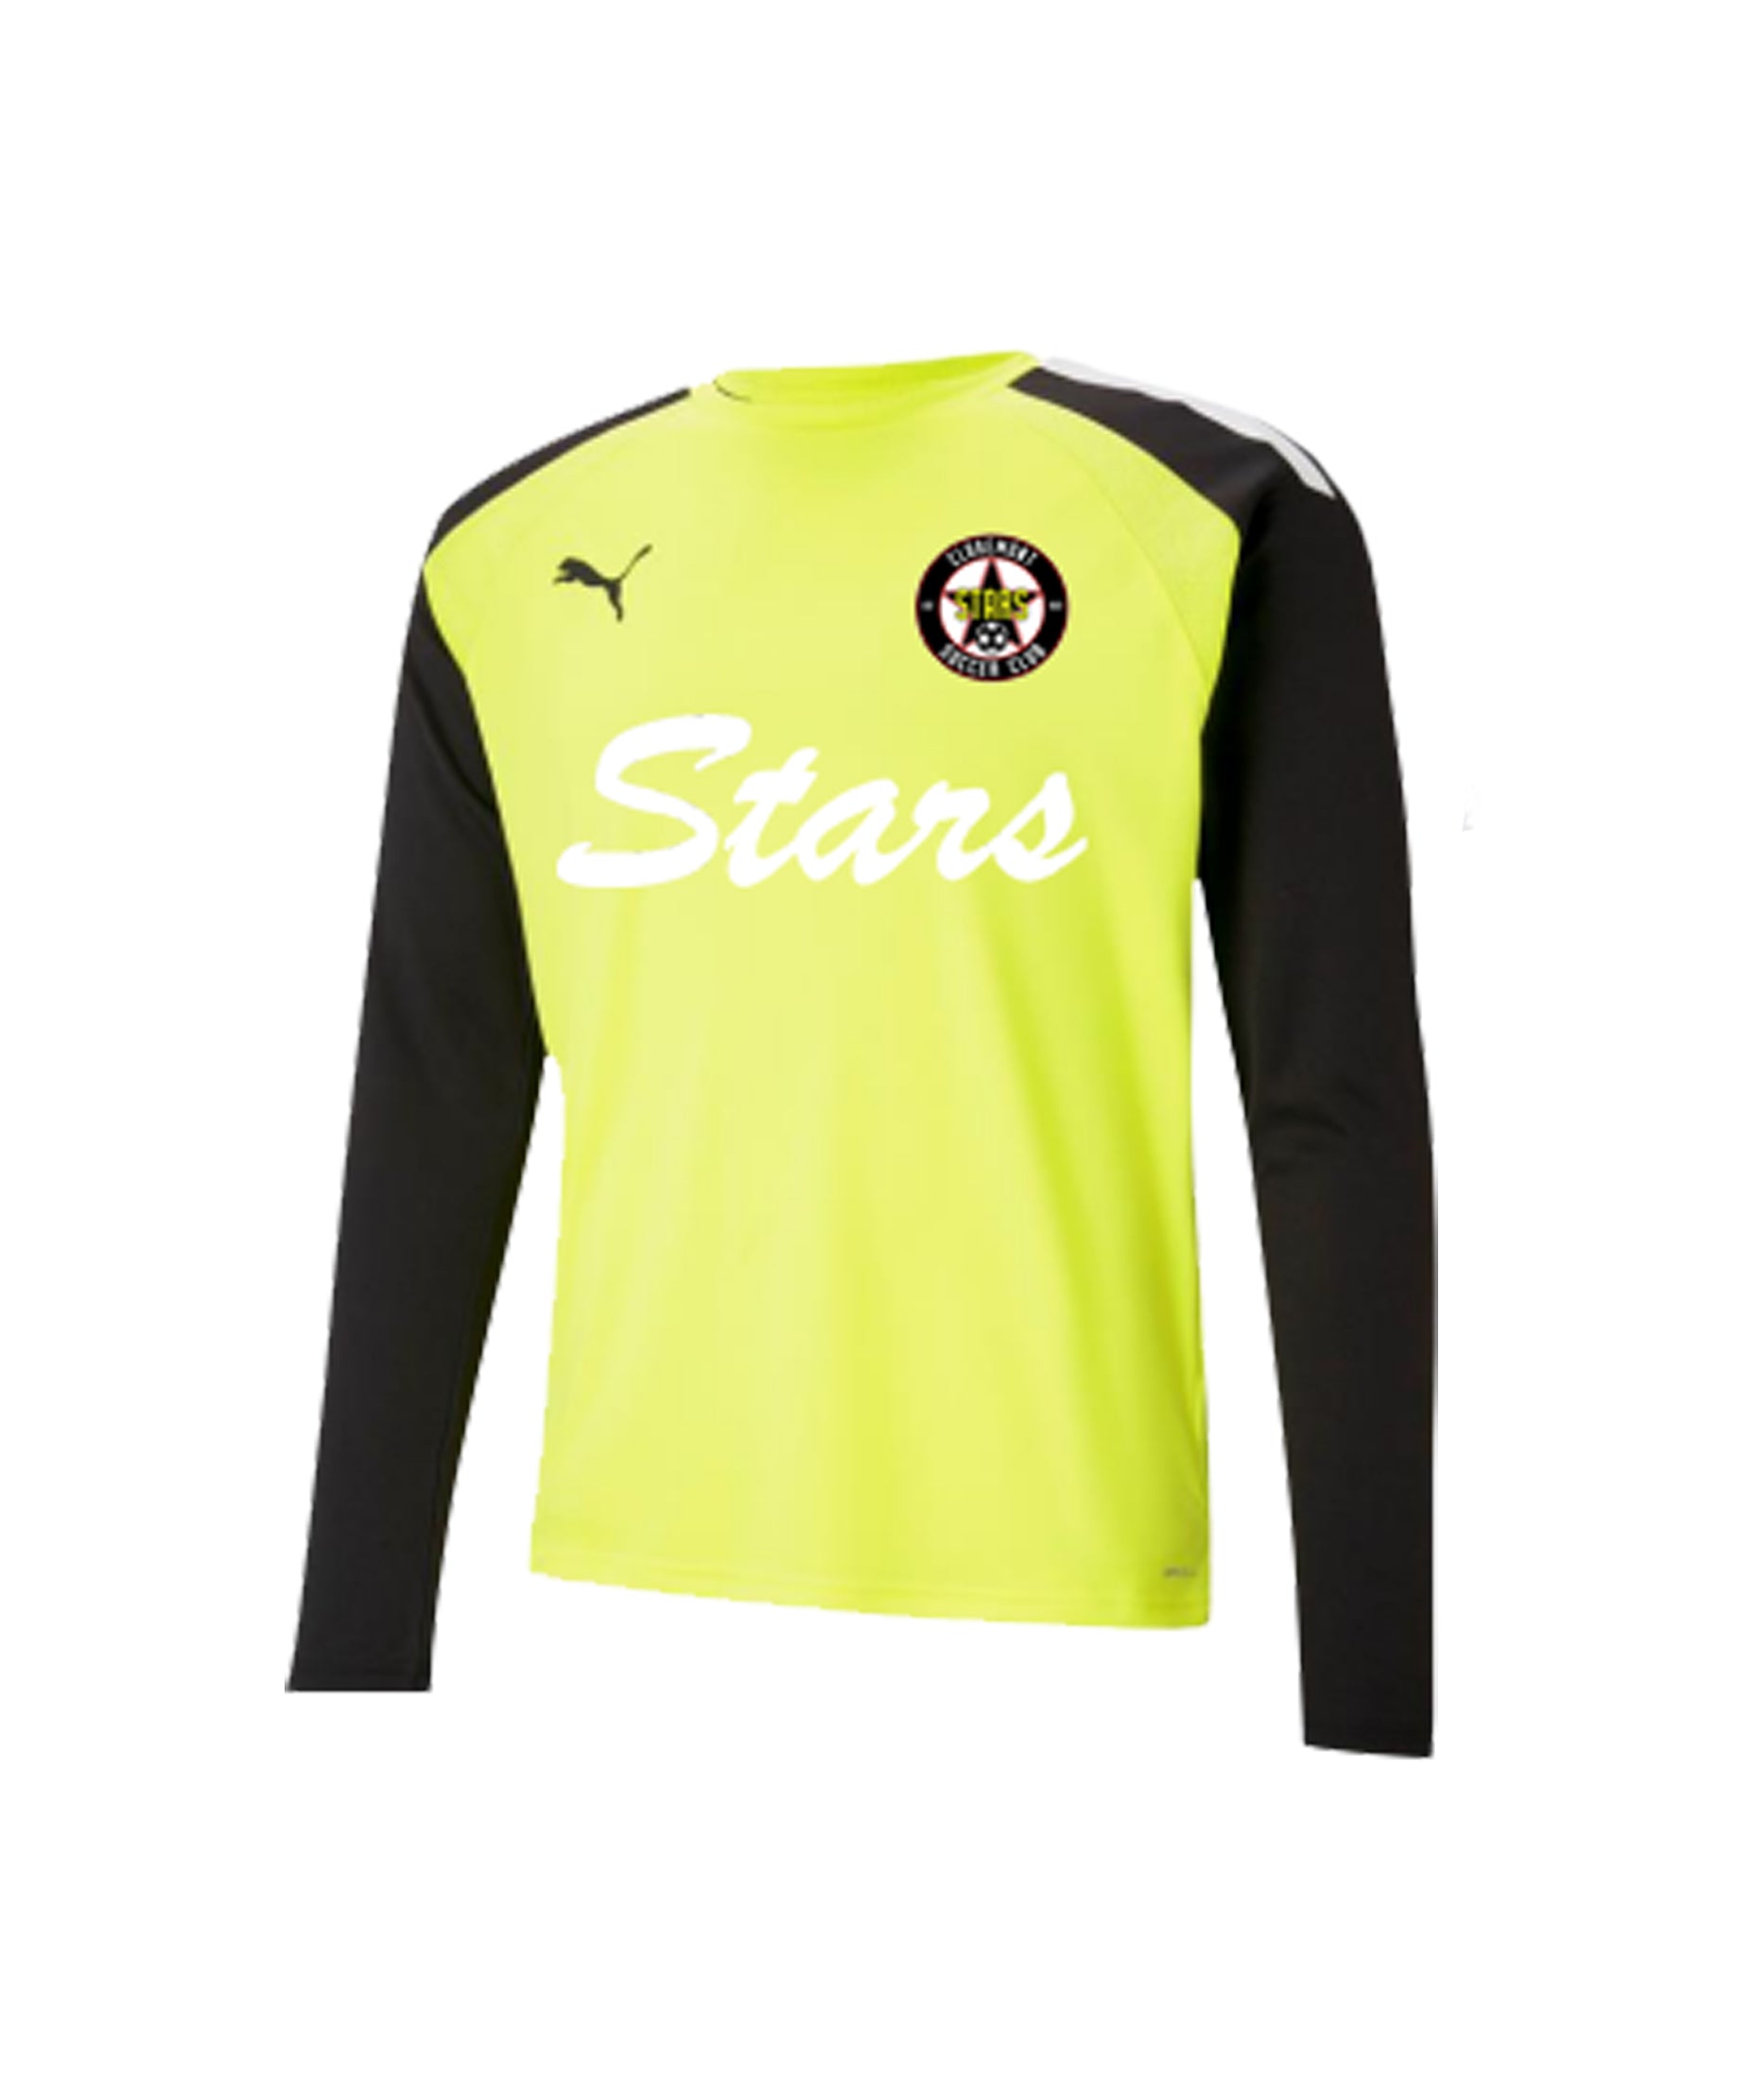 CLAREMONT STARS YOUTH AND ADULT GK JERSEY - PUMA PACER